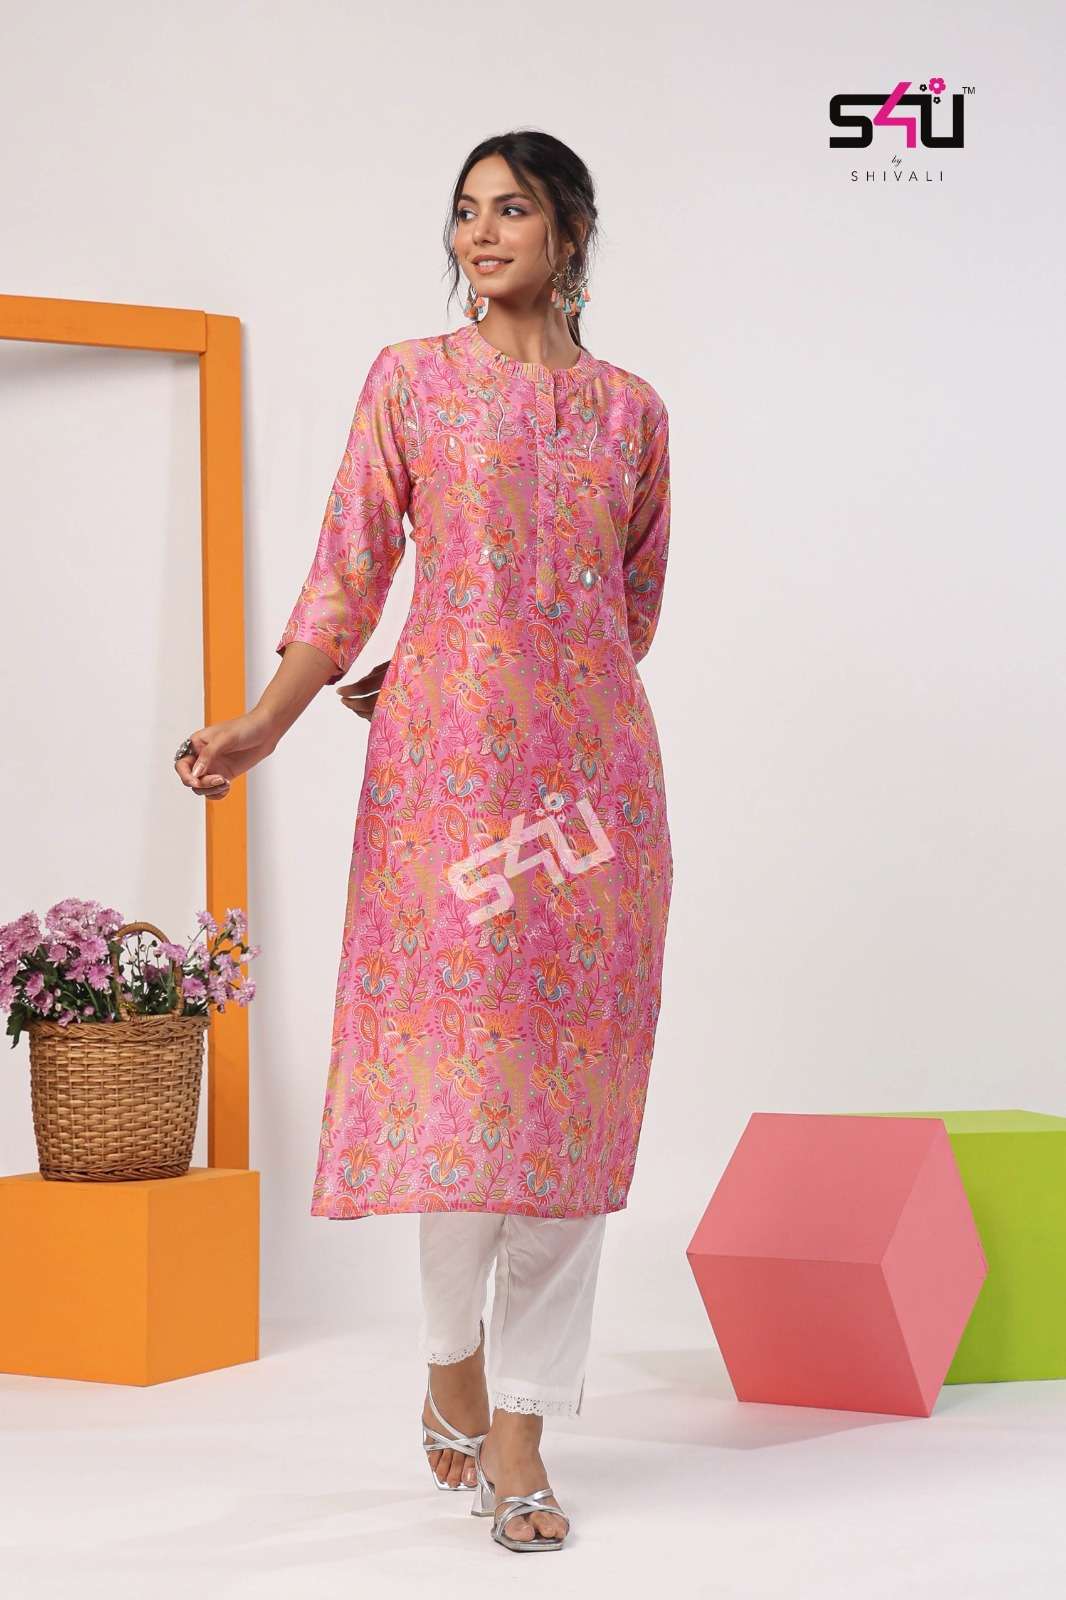 S4U KURTIS SUPPLIER - The Libas Collection - Ethnic Wear For Women |  Pakistani Wear For Women | Clothing at Affordable Prices